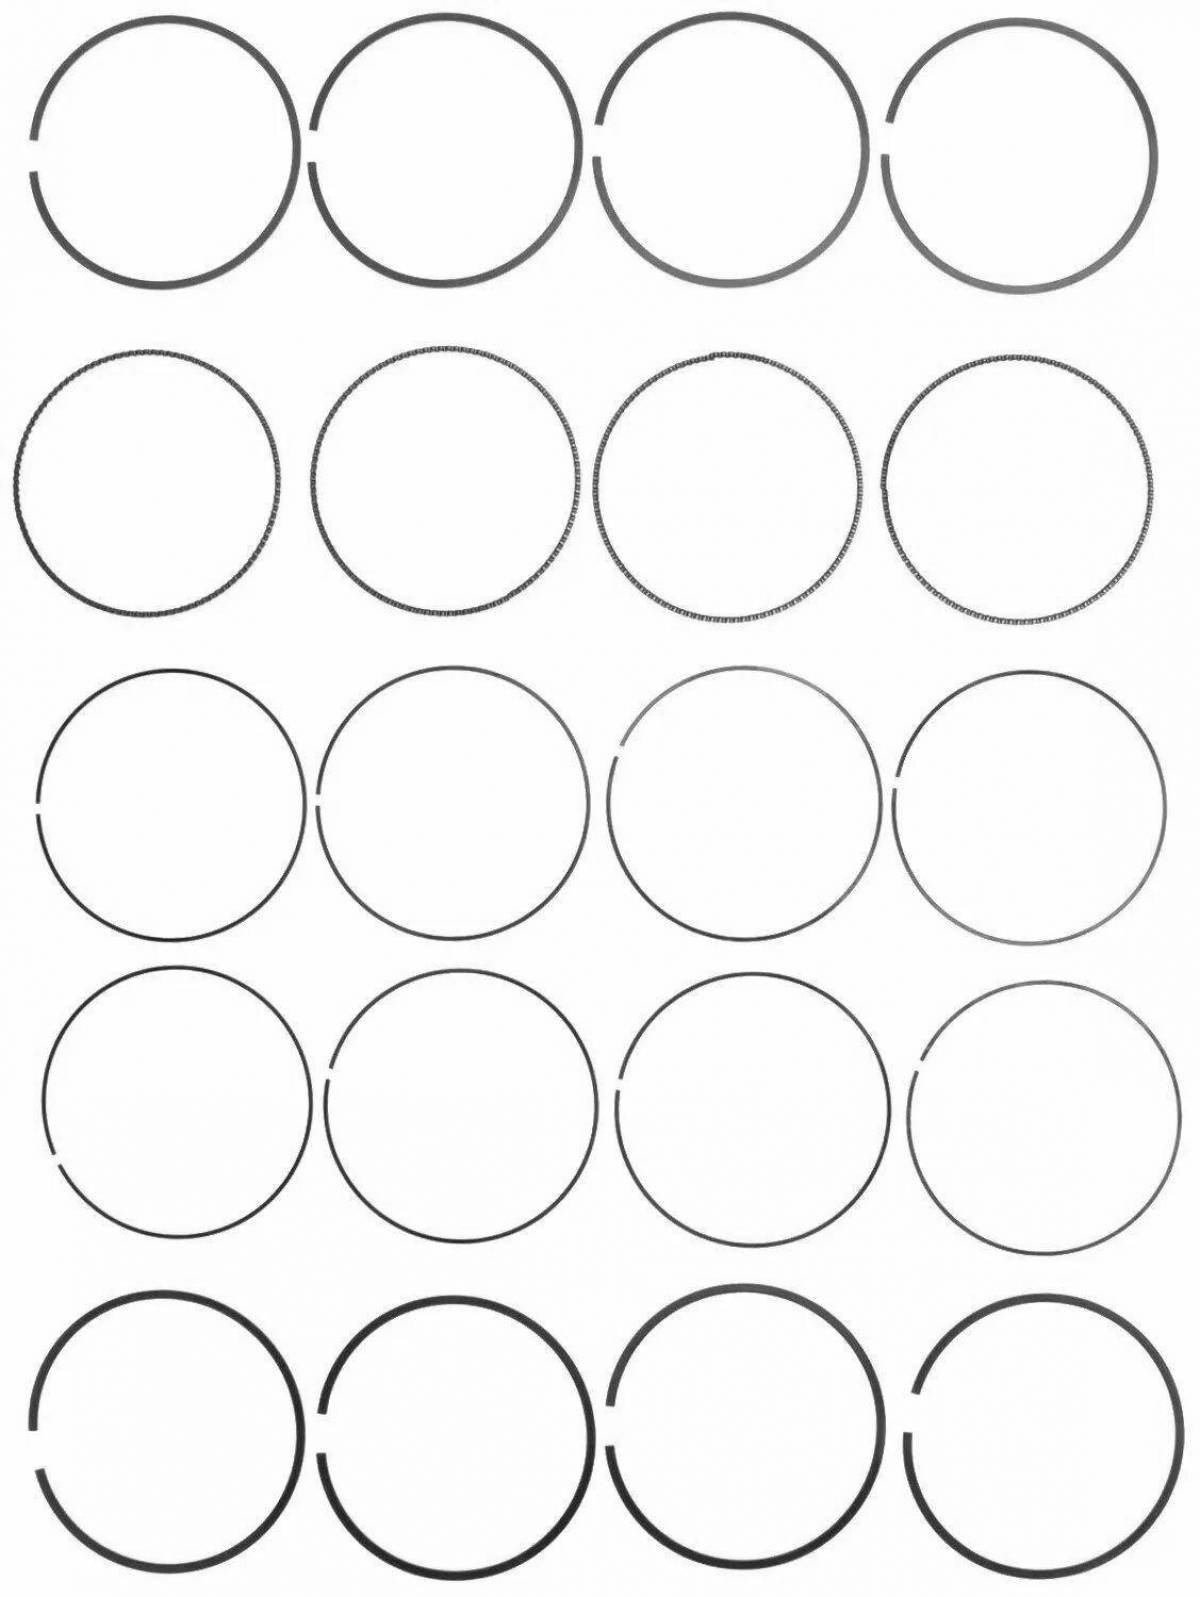 Amazing circles coloring page